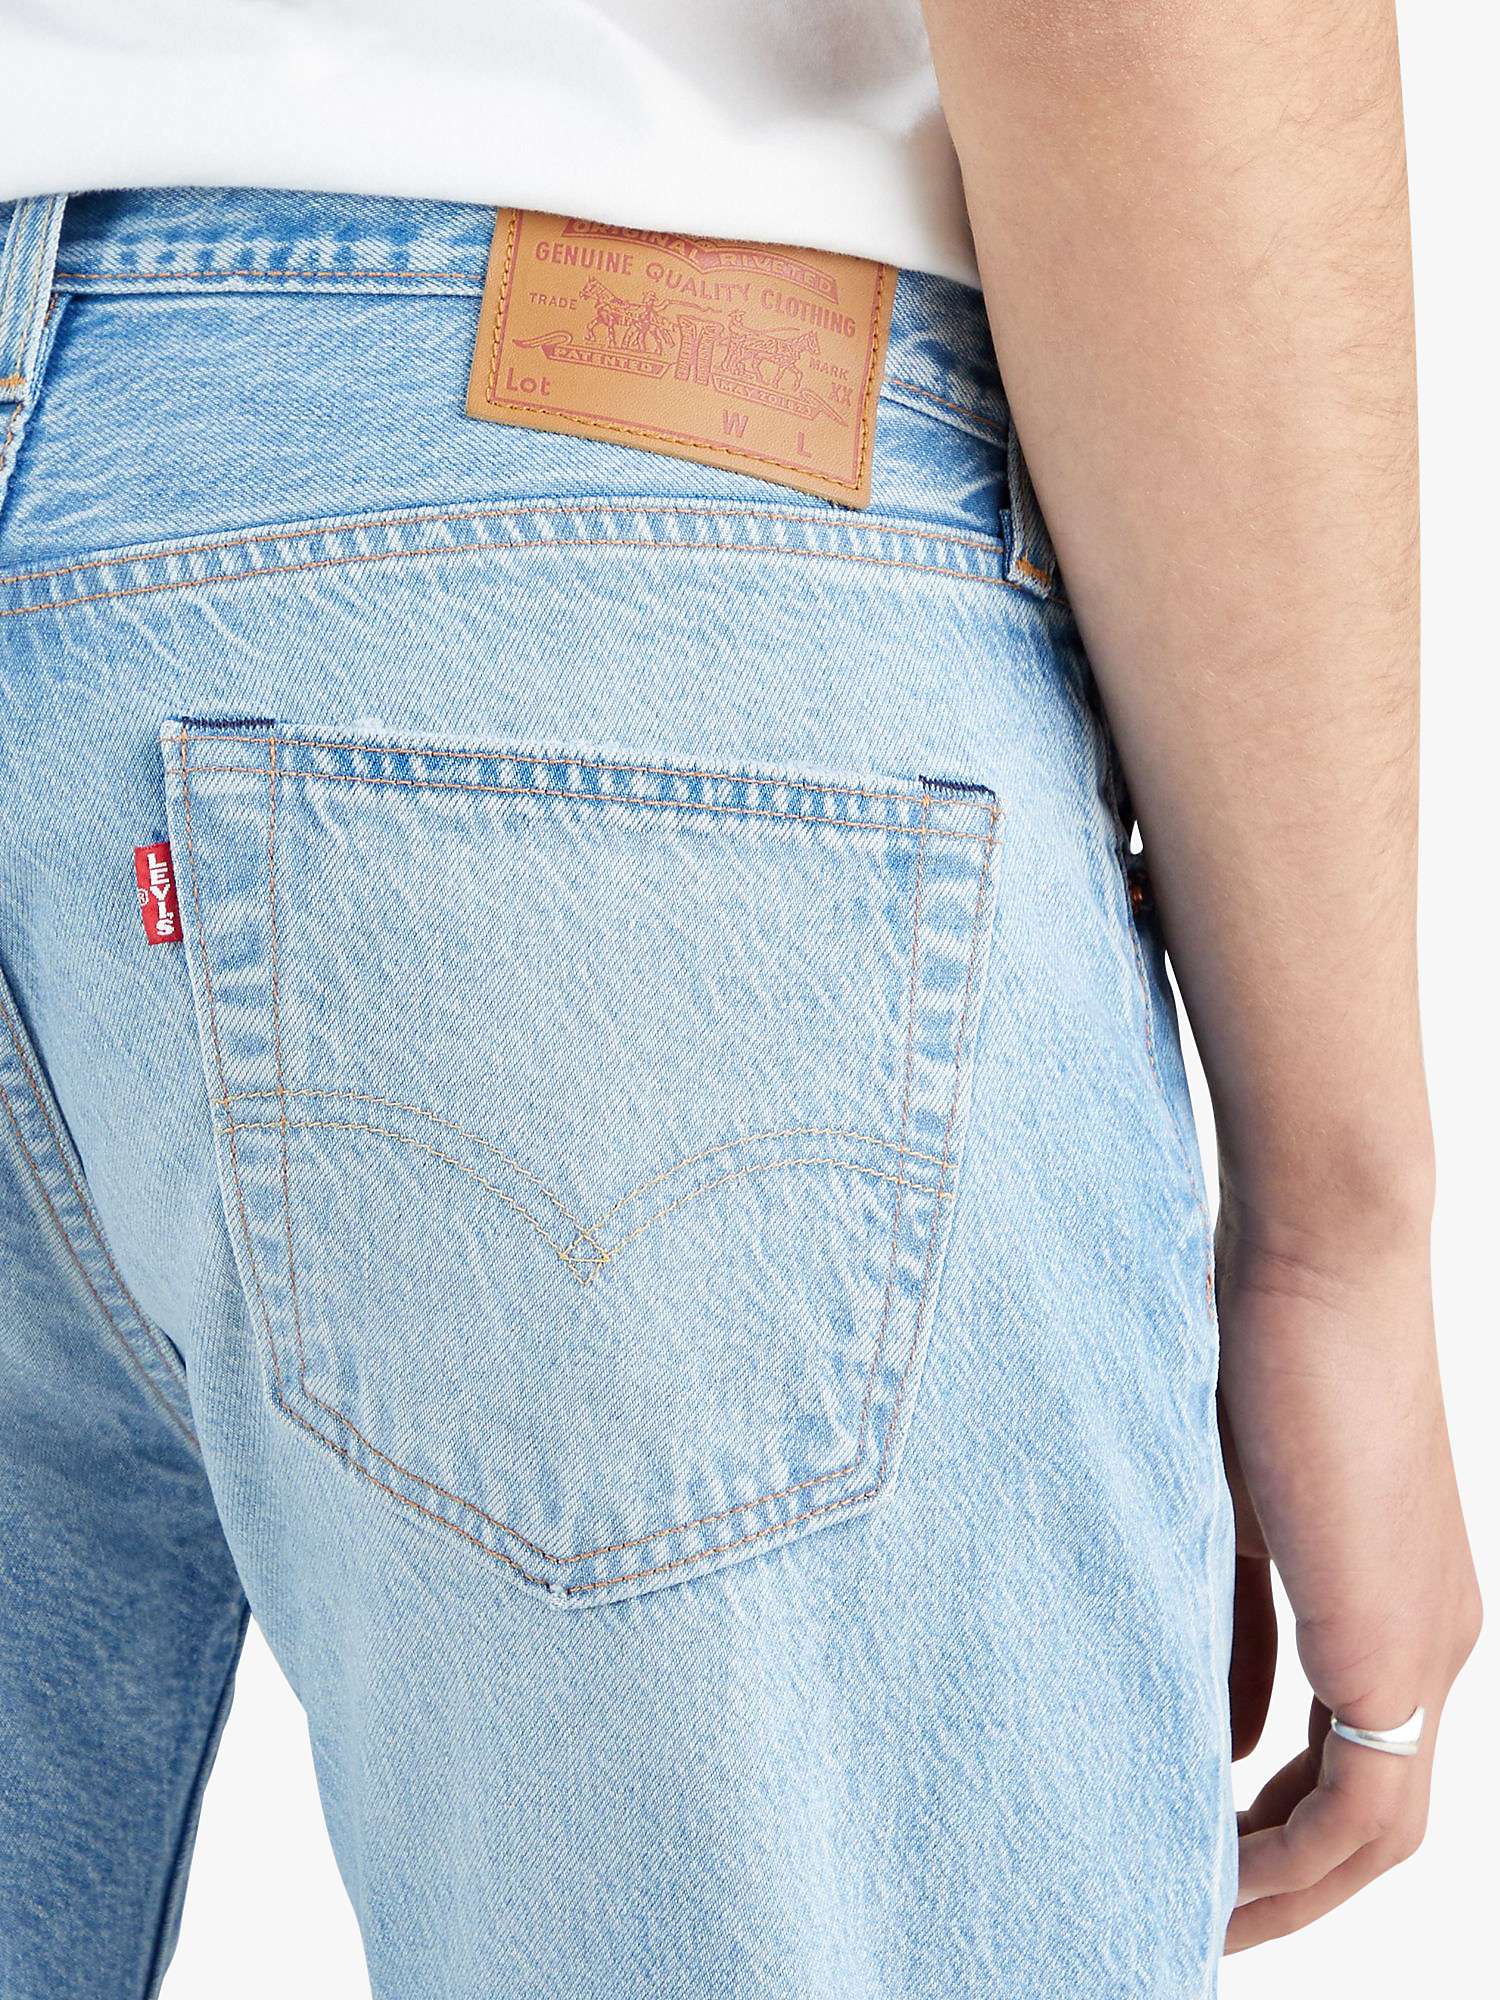 Levi's 501 Original Straight Jeans, Canyon Kings at John Lewis & Partners